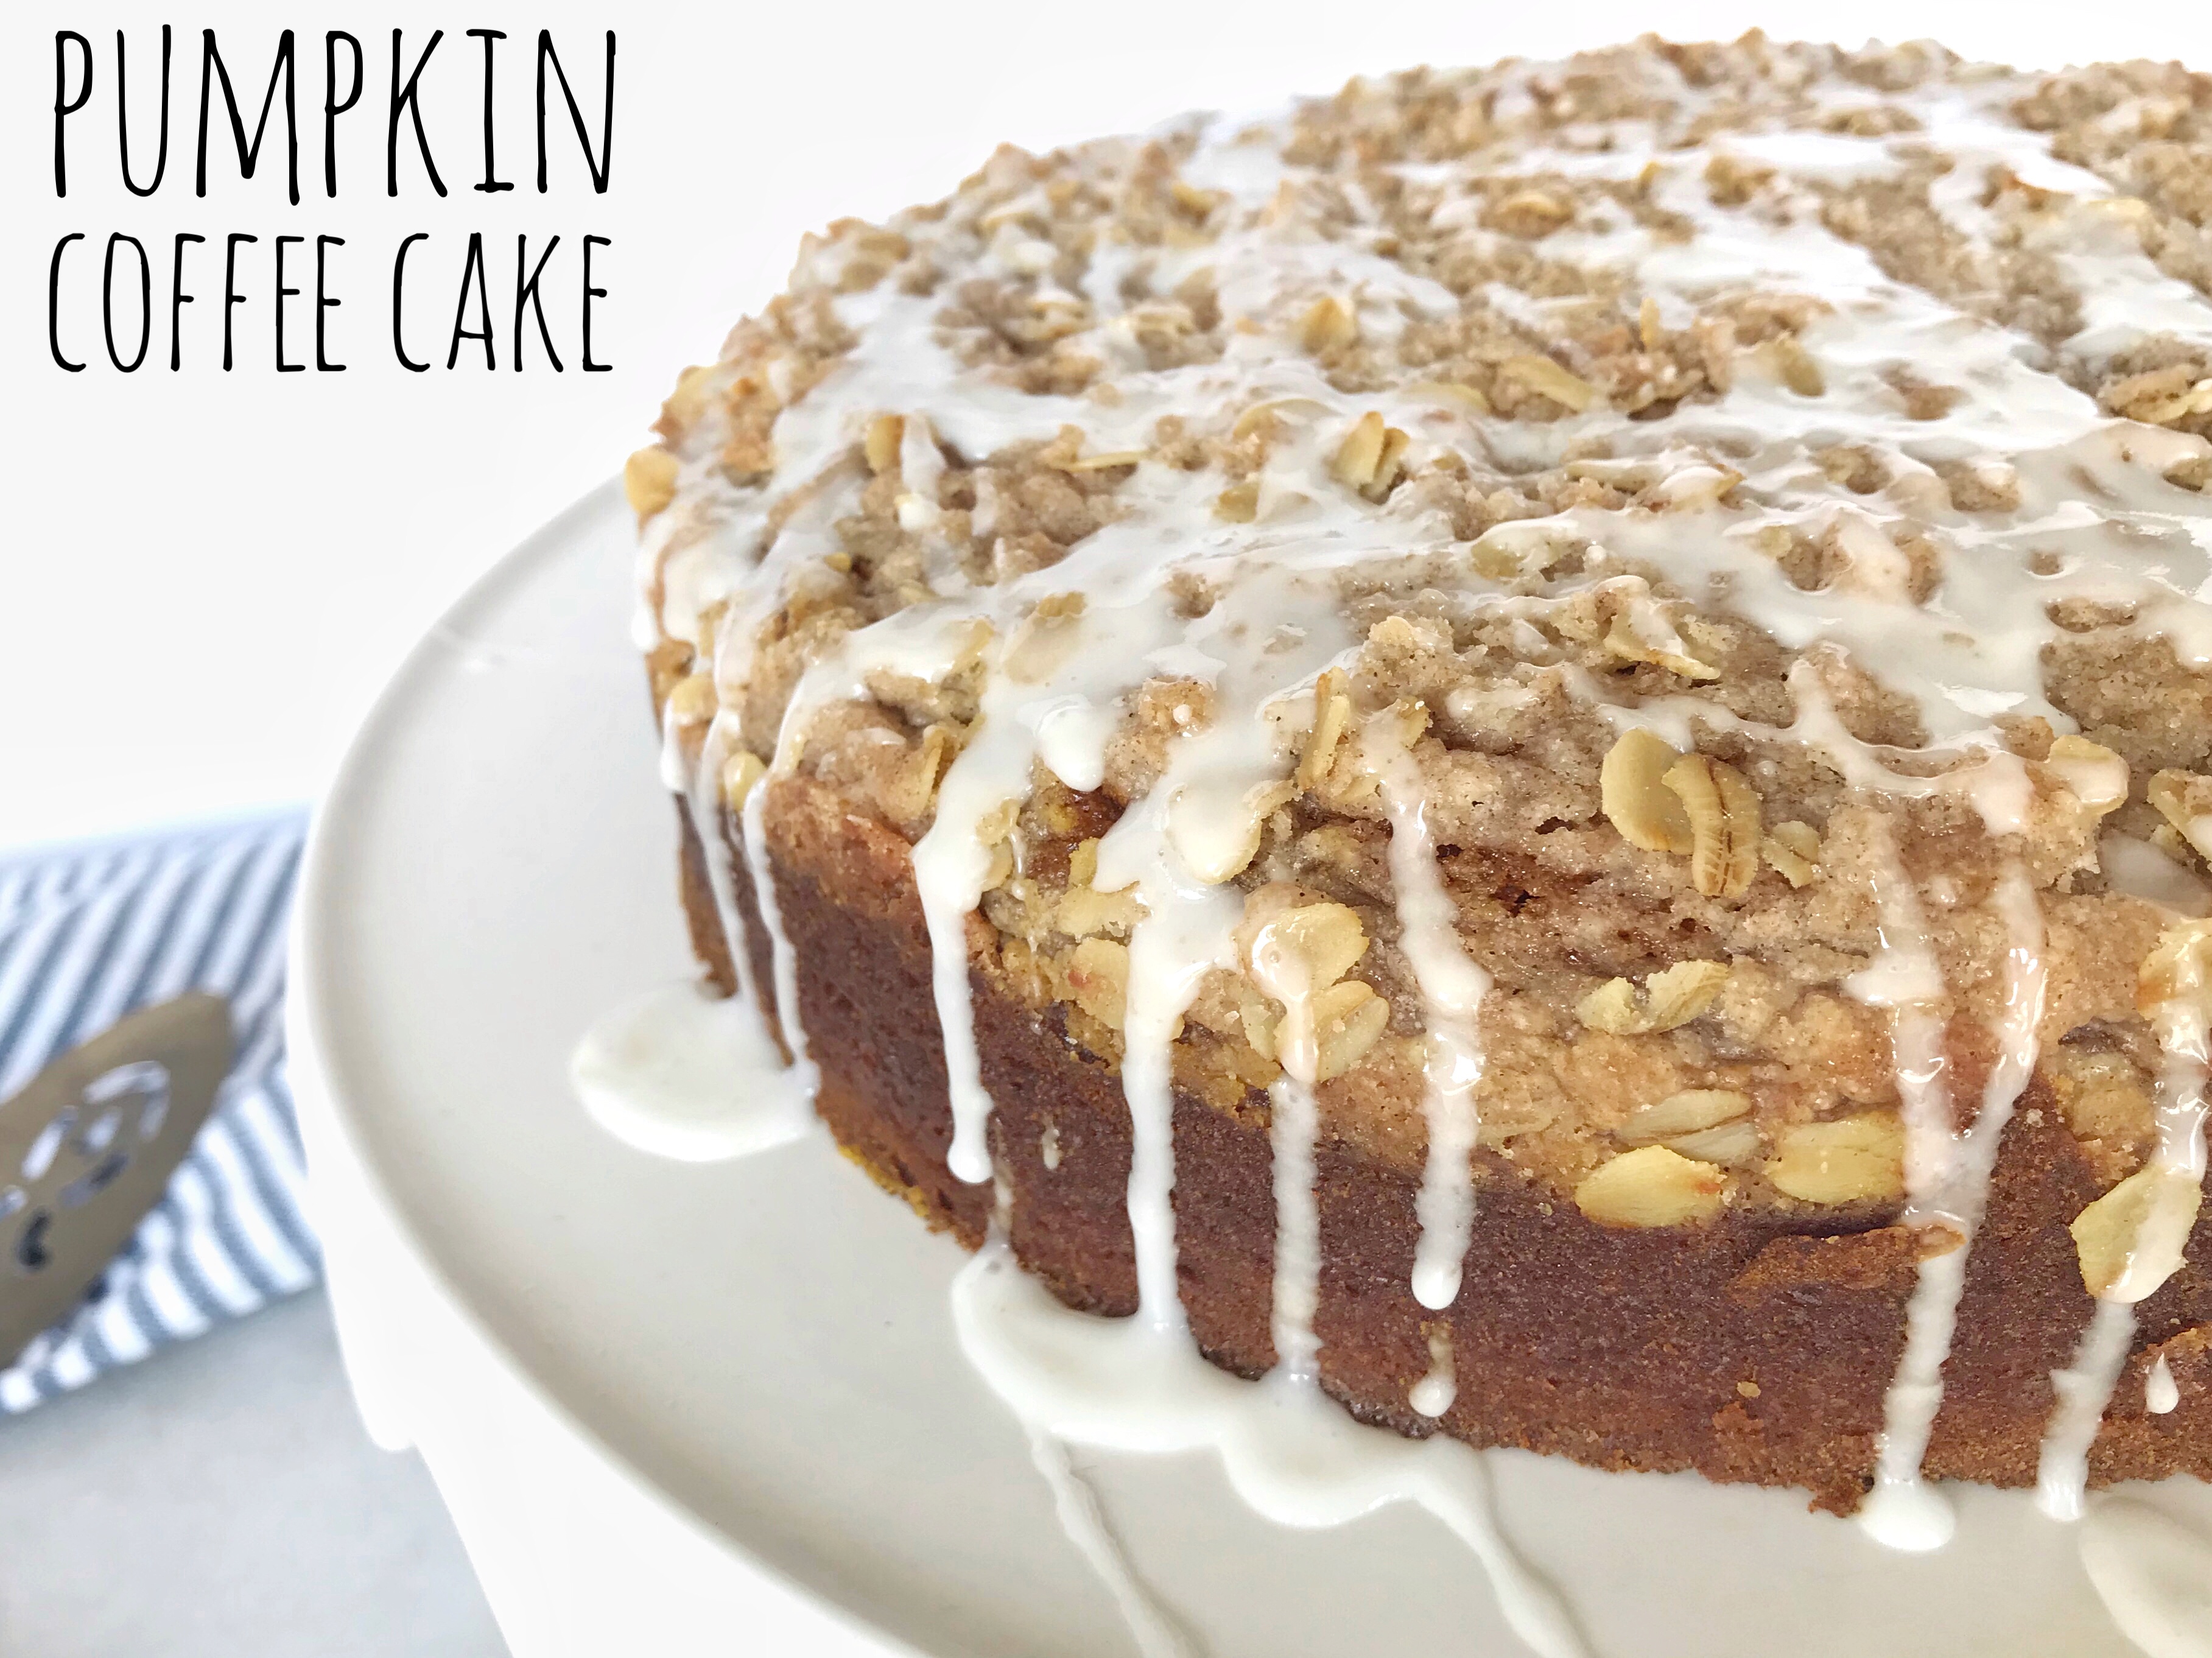 Try our Pumpkin Coffee Cake Recipe